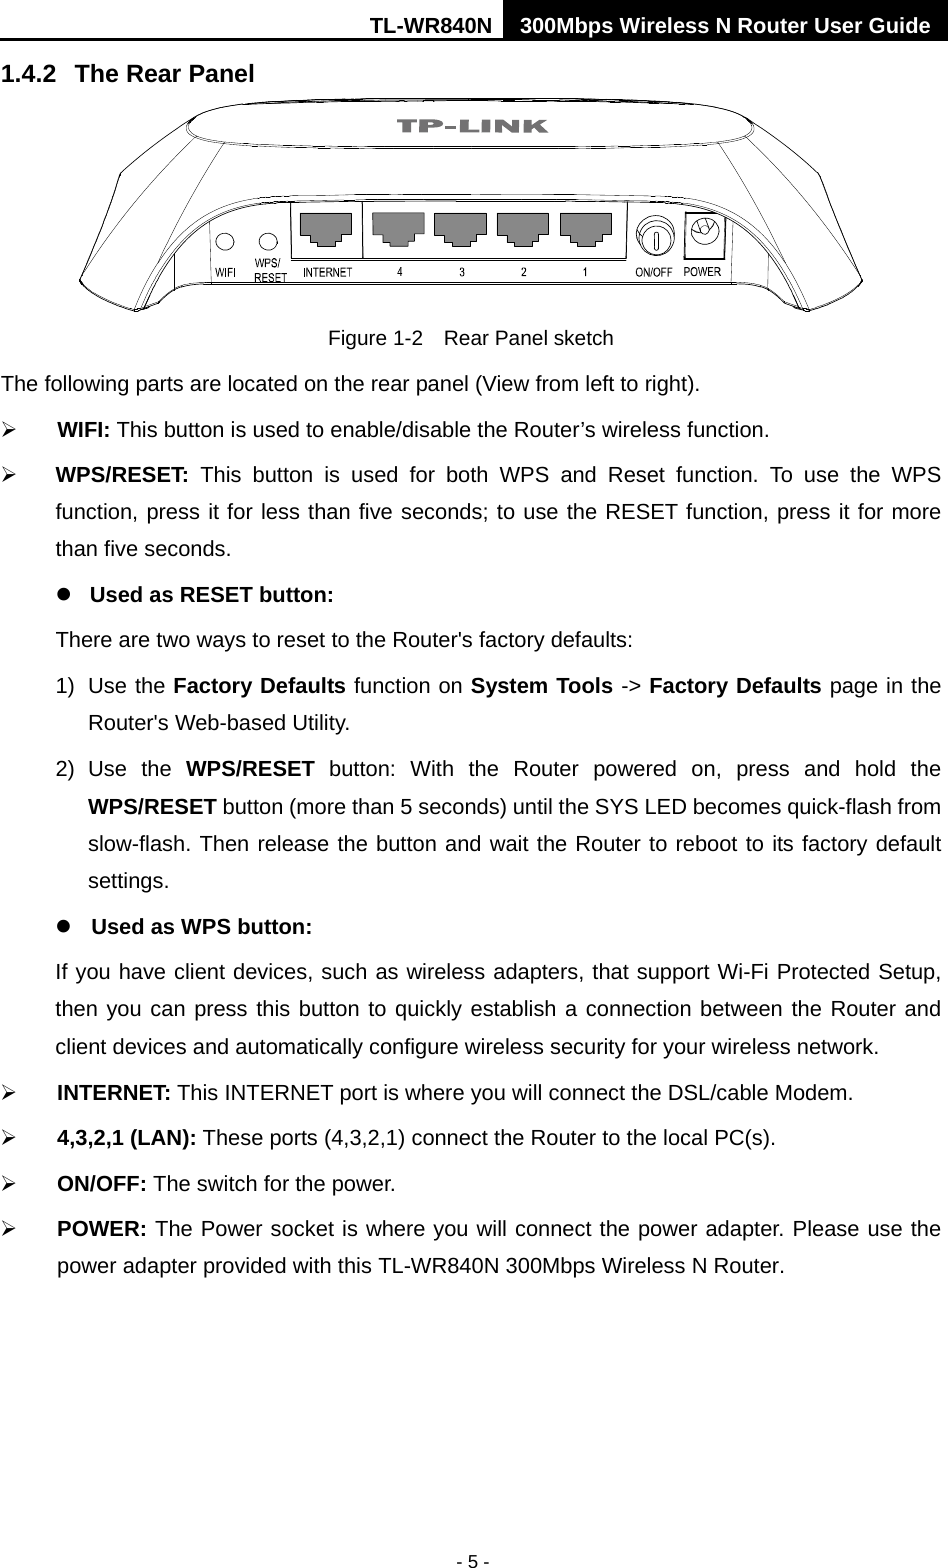 TL-WR840N 300Mbps Wireless N Router User Guide  - 5 - 1.4.2 The Rear Panel  Figure 1-2    Rear Panel sketch The following parts are located on the rear panel (View from left to right).  WIFI: This button is used to enable/disable the Router’s wireless function.  WPS/RESET: This button is used for both WPS and Reset function. To use the WPS function, press it for less than five seconds; to use the RESET function, press it for more than five seconds.    Used as RESET button: There are two ways to reset to the Router&apos;s factory defaults: 1) Use the Factory Defaults function on System Tools -&gt; Factory Defaults page in the Router&apos;s Web-based Utility. 2) Use the WPS/RESET button:  With the  Router powered on, press and hold the WPS/RESET button (more than 5 seconds) until the SYS LED becomes quick-flash from slow-flash. Then release the button and wait the Router to reboot to its factory default settings.  Used as WPS button: If you have client devices, such as wireless adapters, that support Wi-Fi Protected Setup, then you can press this button to quickly establish a connection between the Router and client devices and automatically configure wireless security for your wireless network.  INTERNET: This INTERNET port is where you will connect the DSL/cable Modem.  4,3,2,1 (LAN): These ports (4,3,2,1) connect the Router to the local PC(s).  ON/OFF: The switch for the power.  POWER: The Power socket is where you will connect the power adapter. Please use the power adapter provided with this TL-WR840N 300Mbps Wireless N Router. 